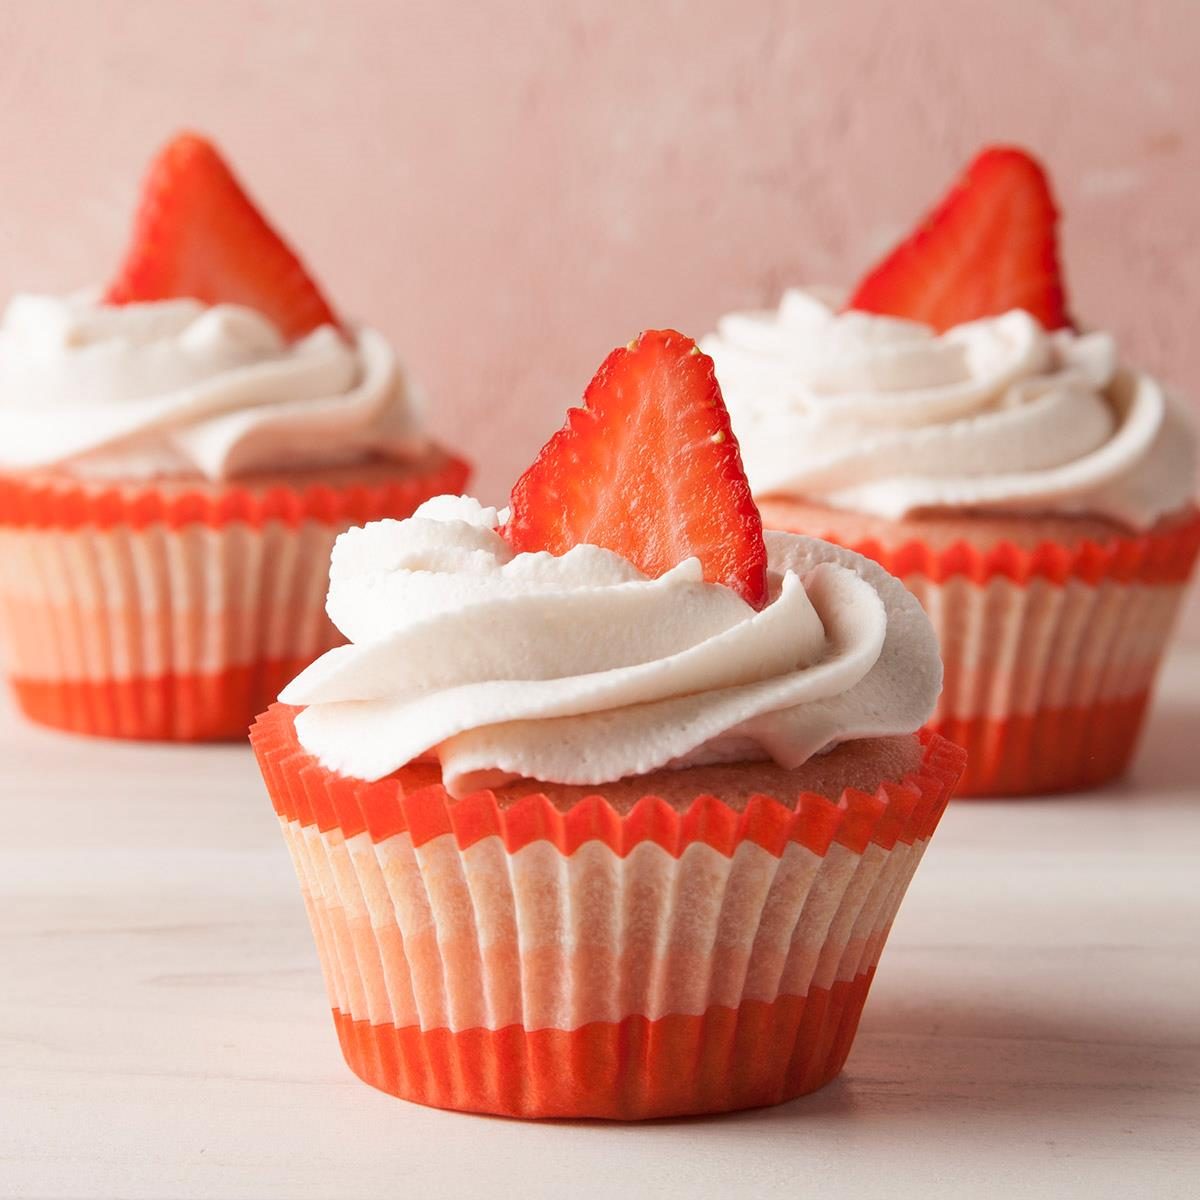 Strawberry Cupcakes With Whipped Cream Frosting Exps Ft19 242523 F 0619 1 15